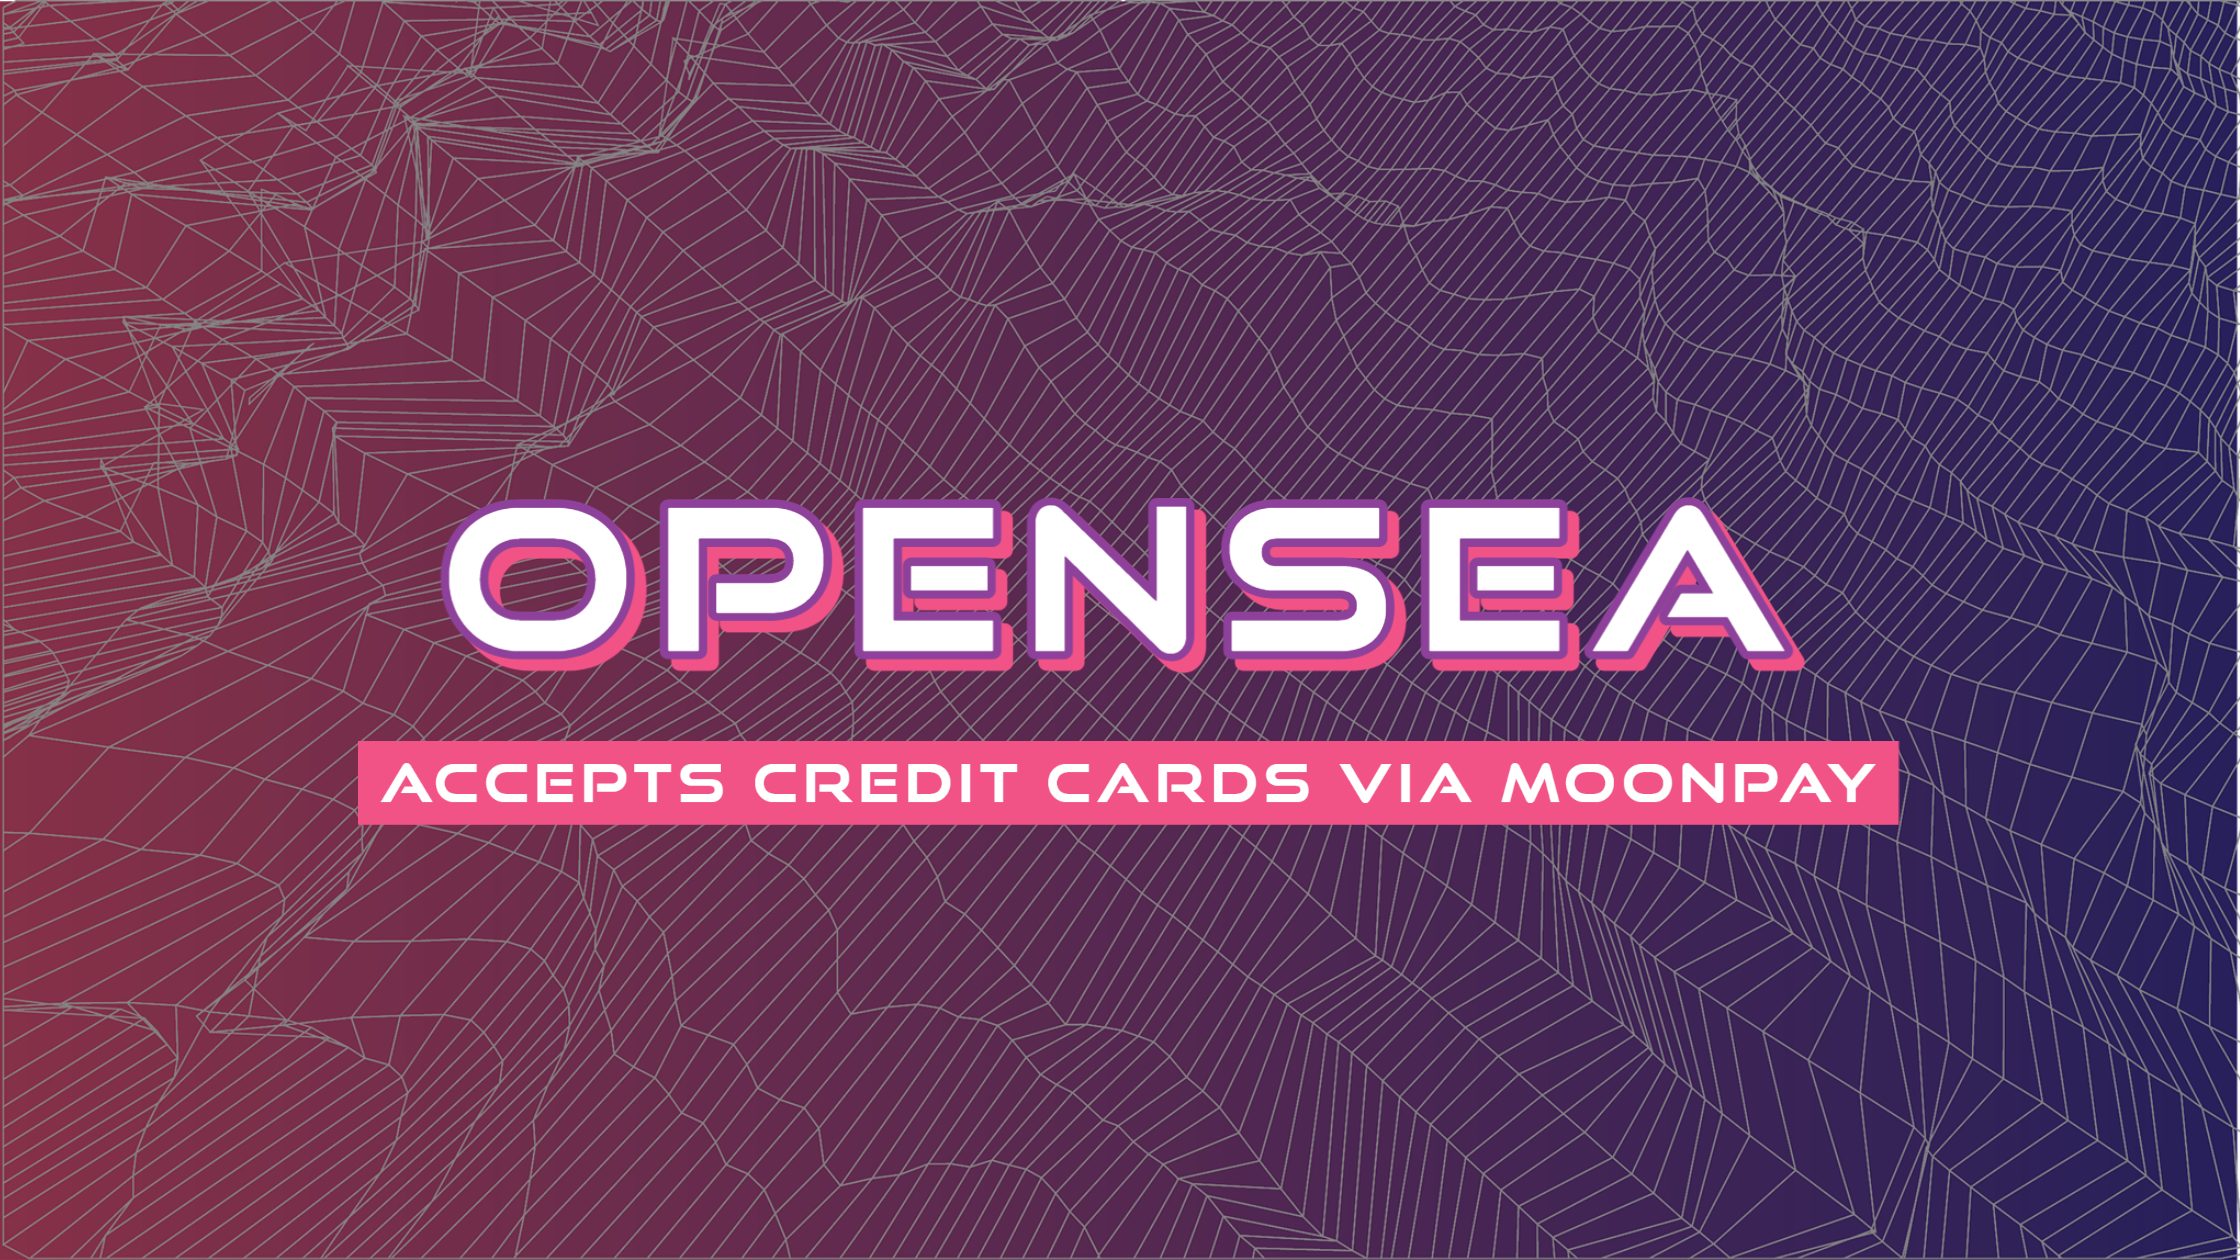 OpenSea Partners with Moonpay to accept Credit Cards on platform.